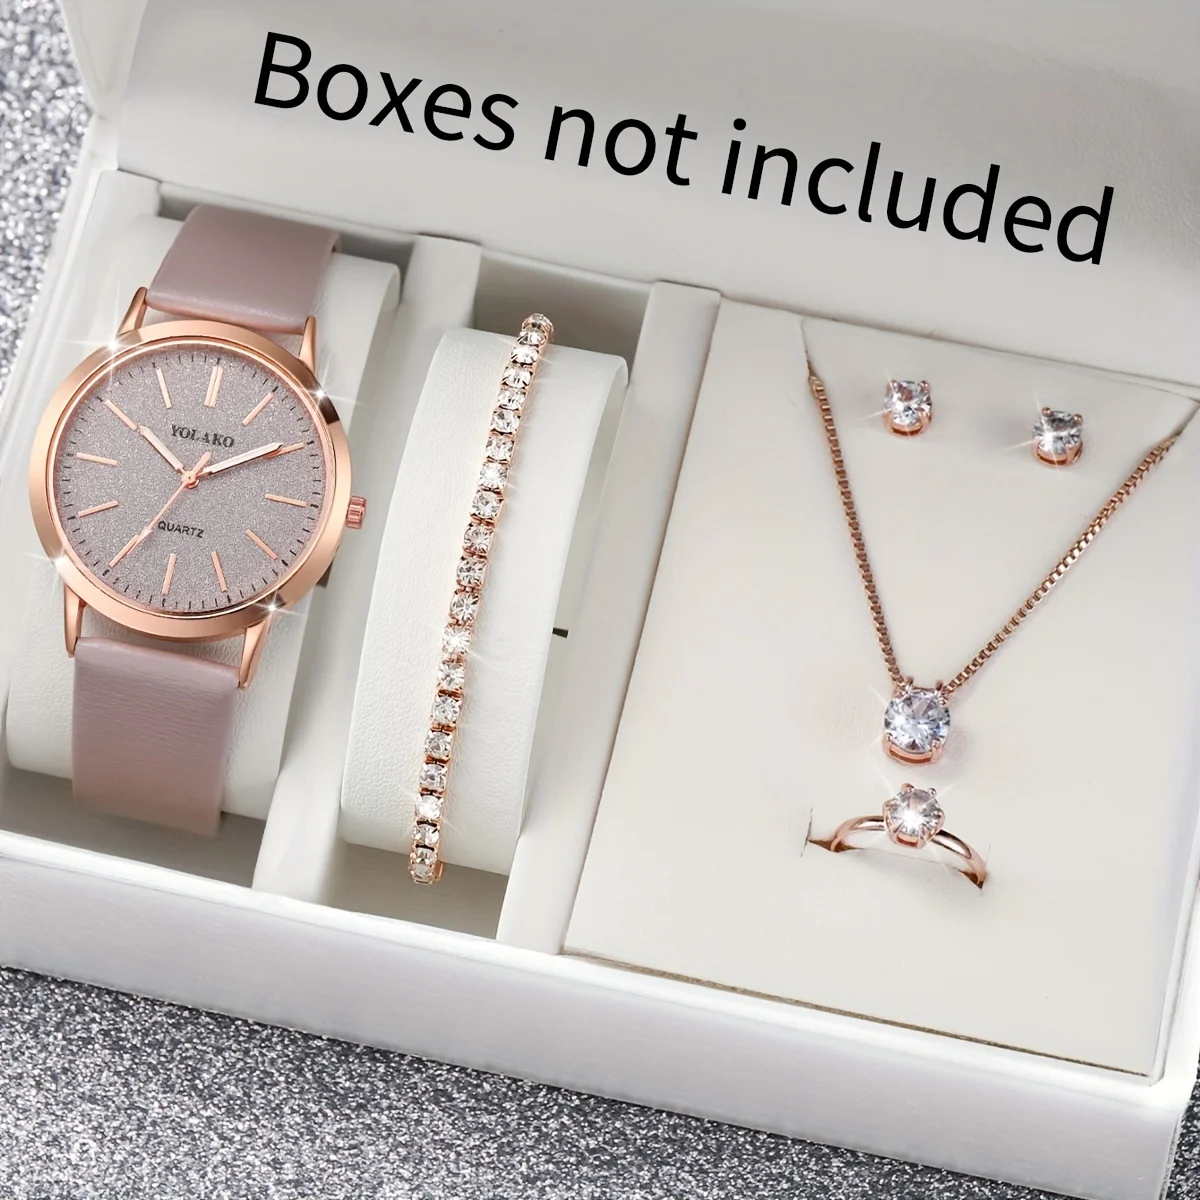 

Chic 6-Piece Women's Quartz Watch Set - Elegant Round Analog Display with PU Leather Band, Perfect Casual Gift for Her